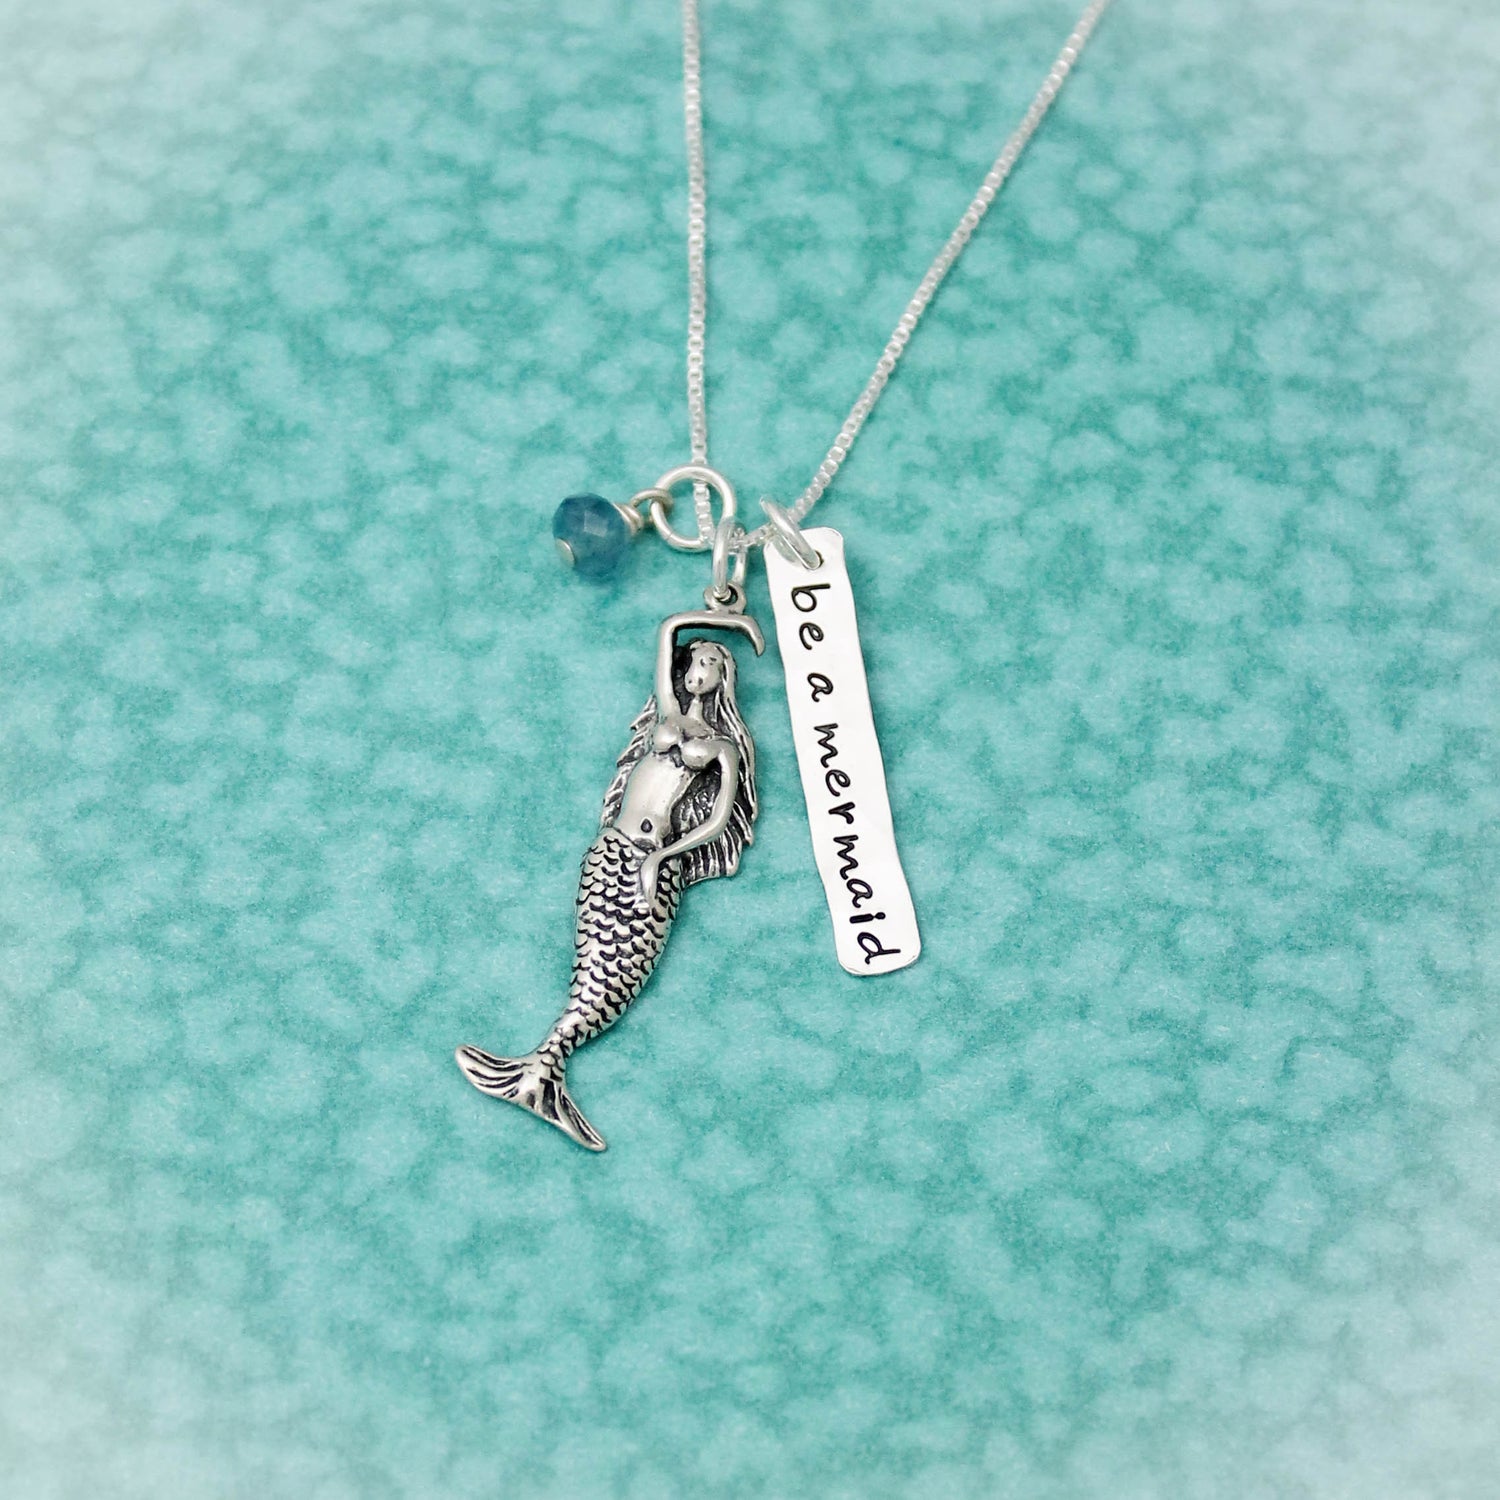 Be A Mermaid Necklace, Mermaid Necklace, Beach Girl Jewelry, Mermaid Jewelry, Beach Necklace, Vacation Cruise Sterling Silver Hand Stamped